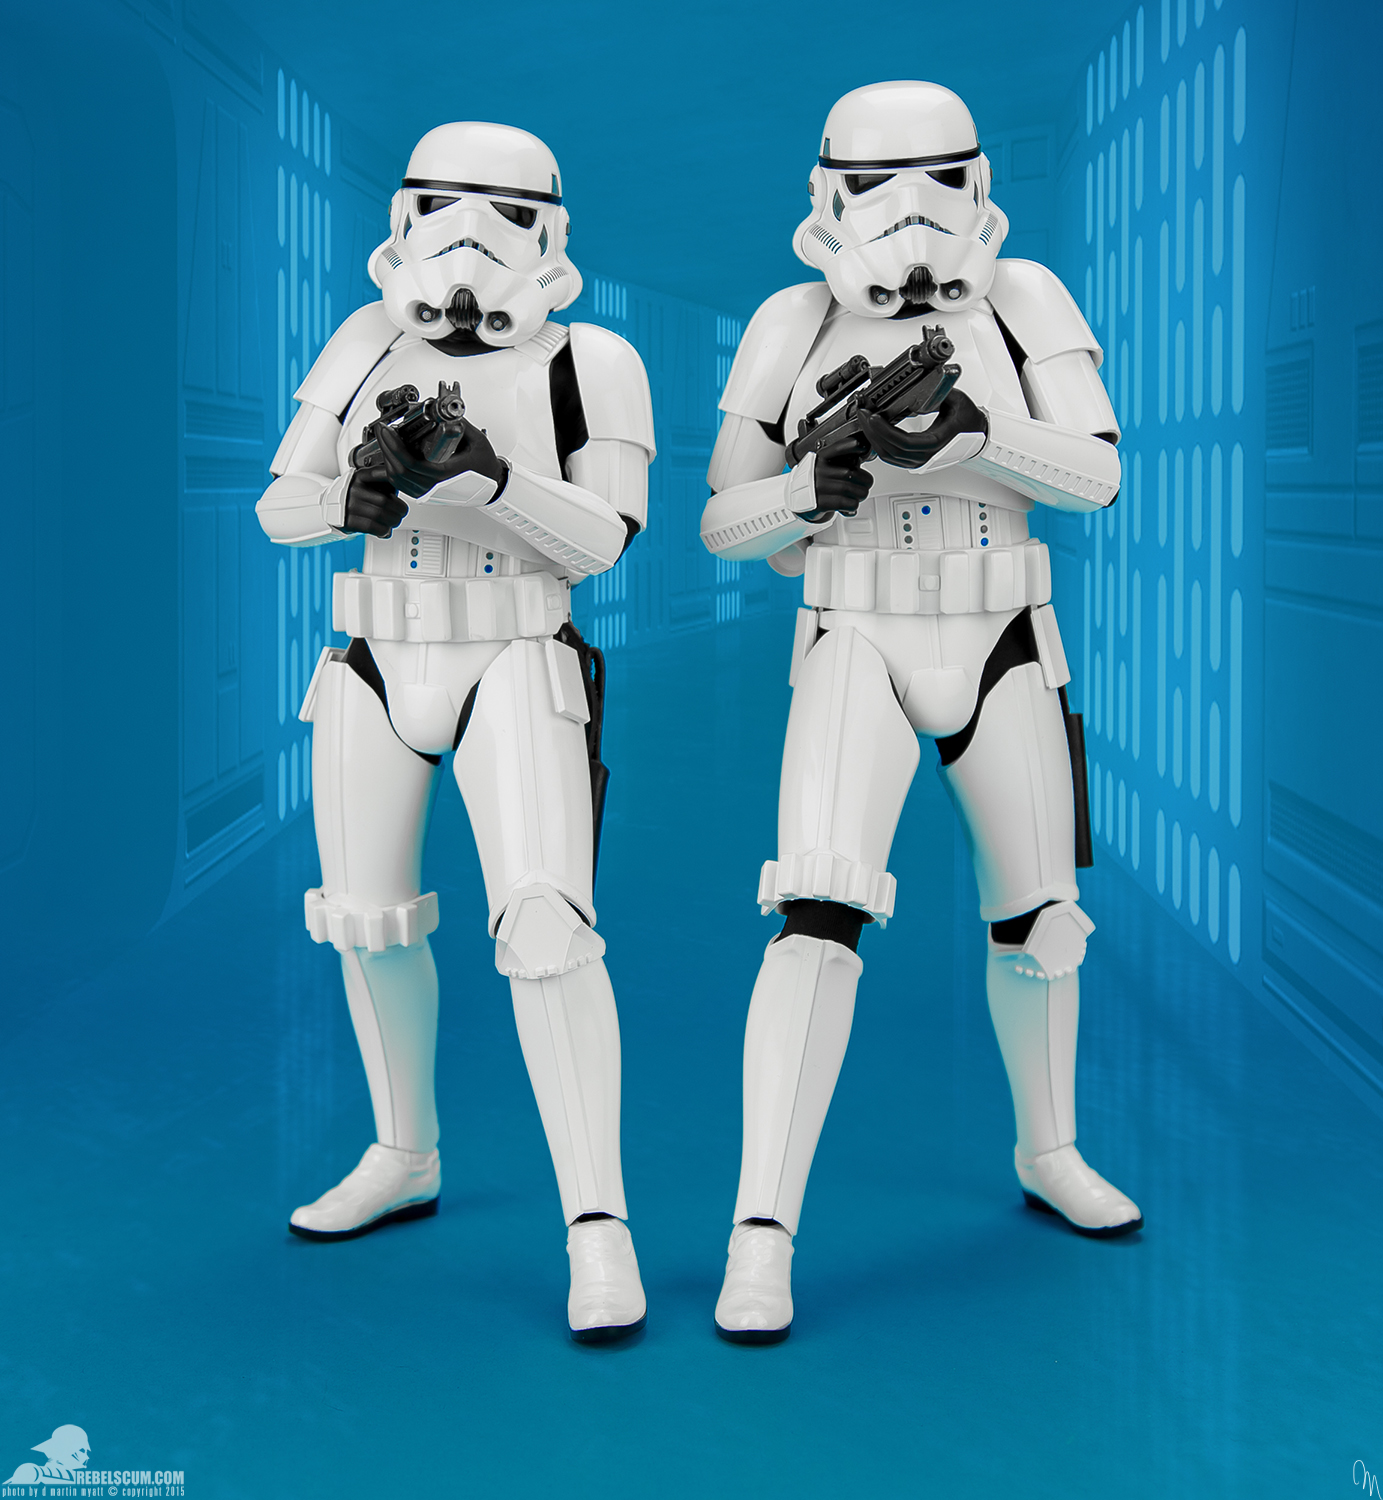 MMS268-Stormtroopers-Hot-Toys-Star-Wars-Two-Pack-030.jpg